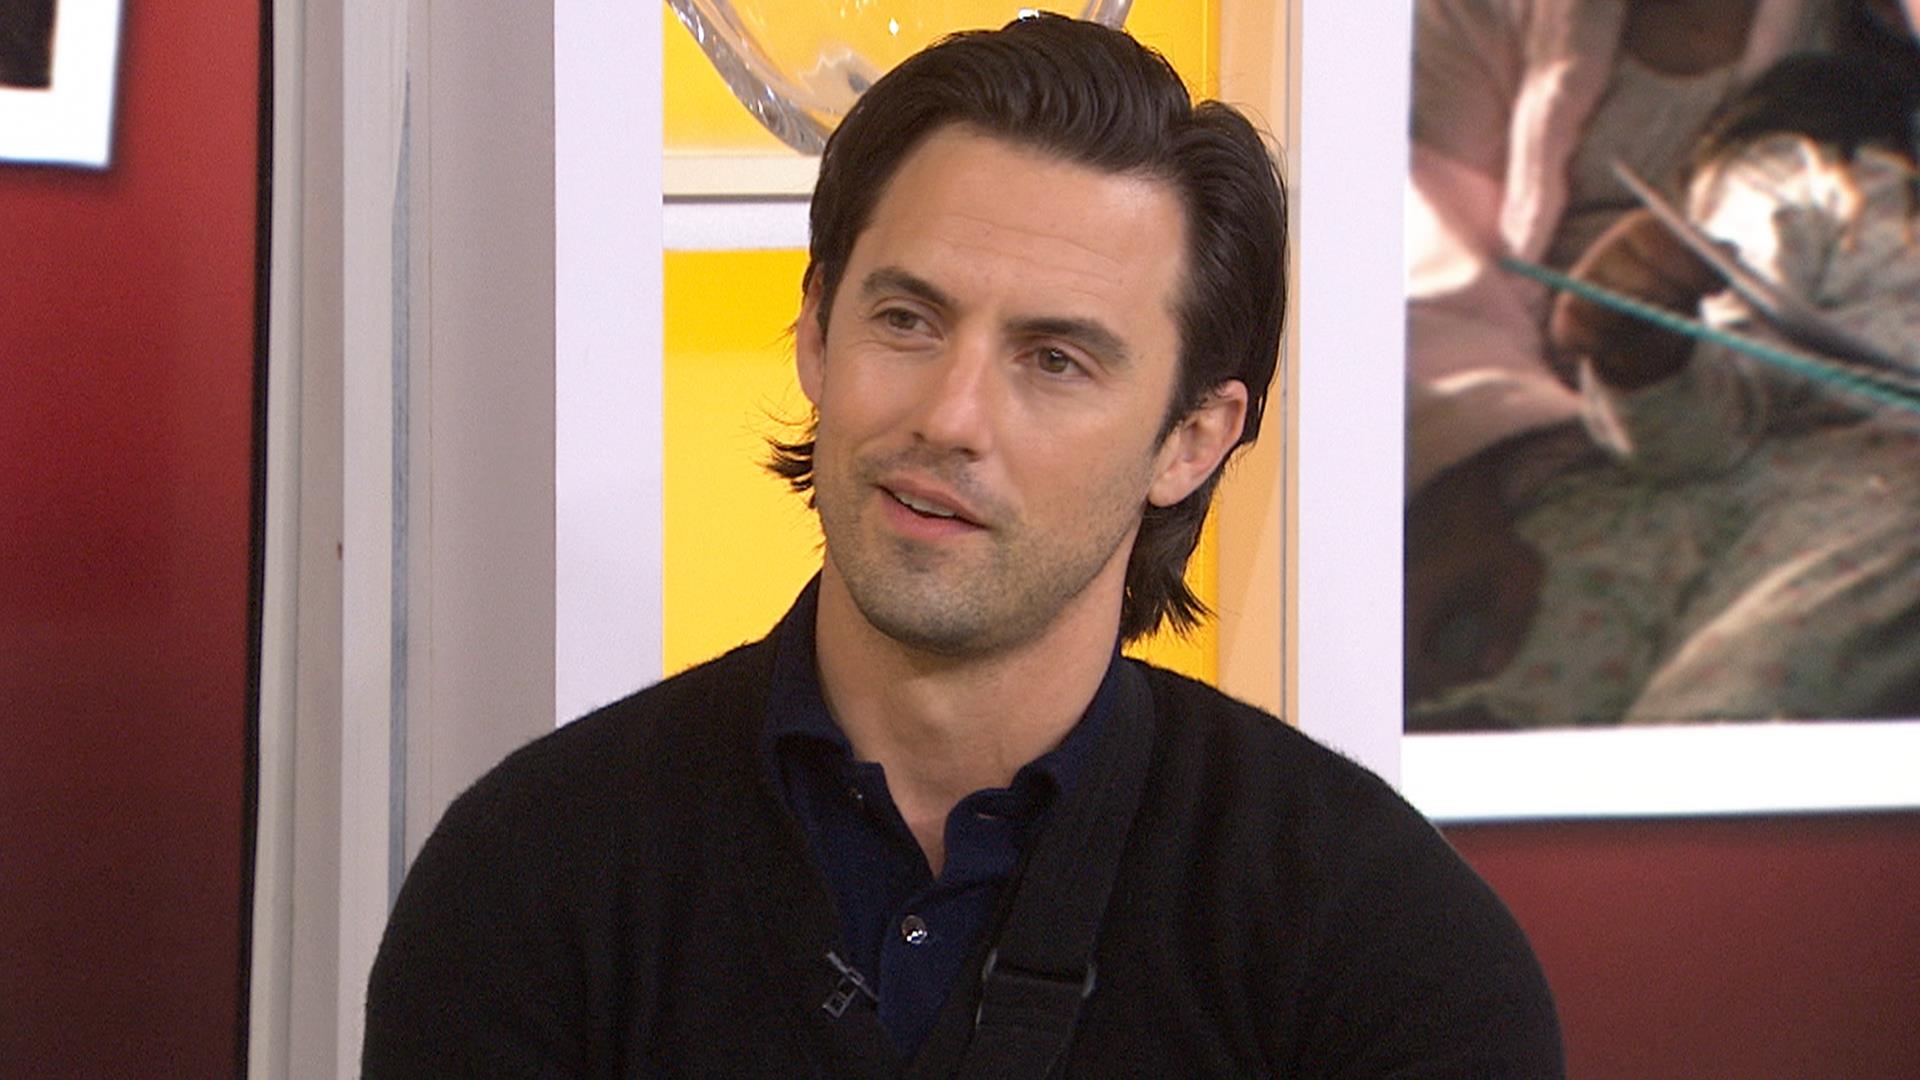 Milo Ventimiglia dishes on 'This Is Us' (and his real age)